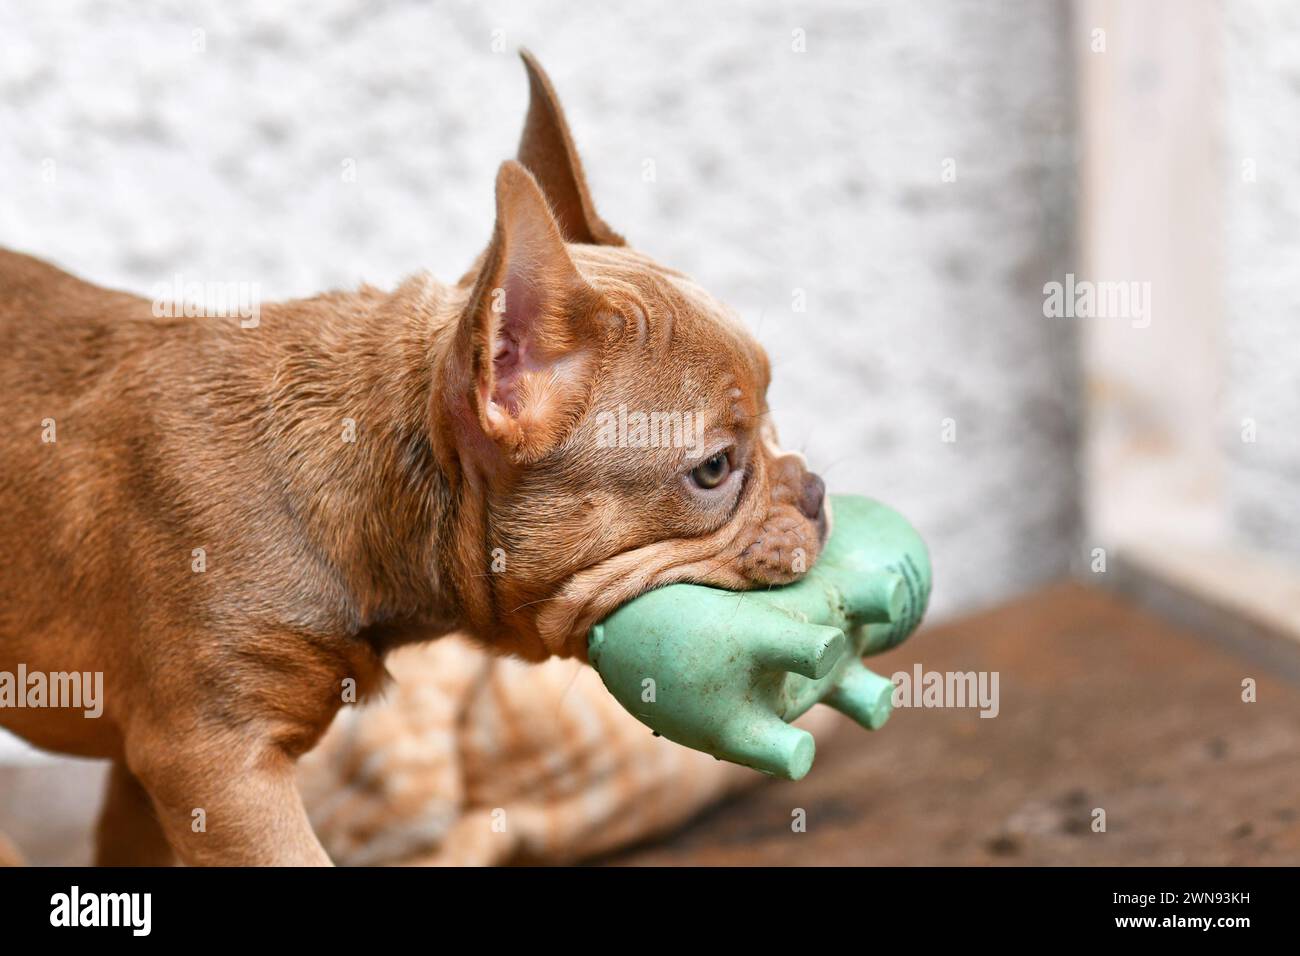 Isabella Sable French Bulldog dog puppy carrying squeaky toy in mouth Stock Photo